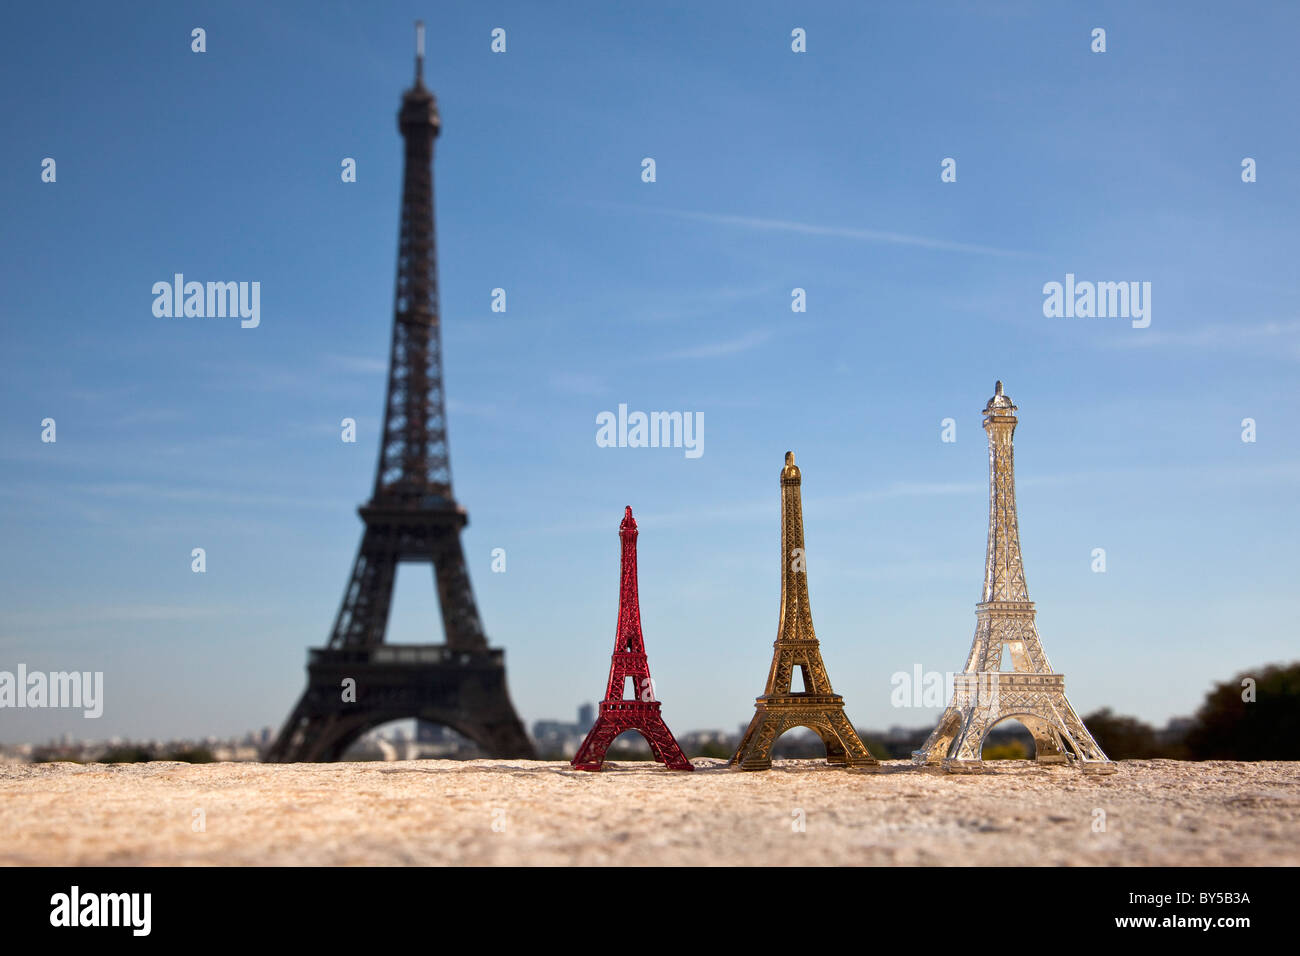 Three Eiffel Tower replica souvenirs next to the real Eiffel Tower, focus on foreground Stock Photo